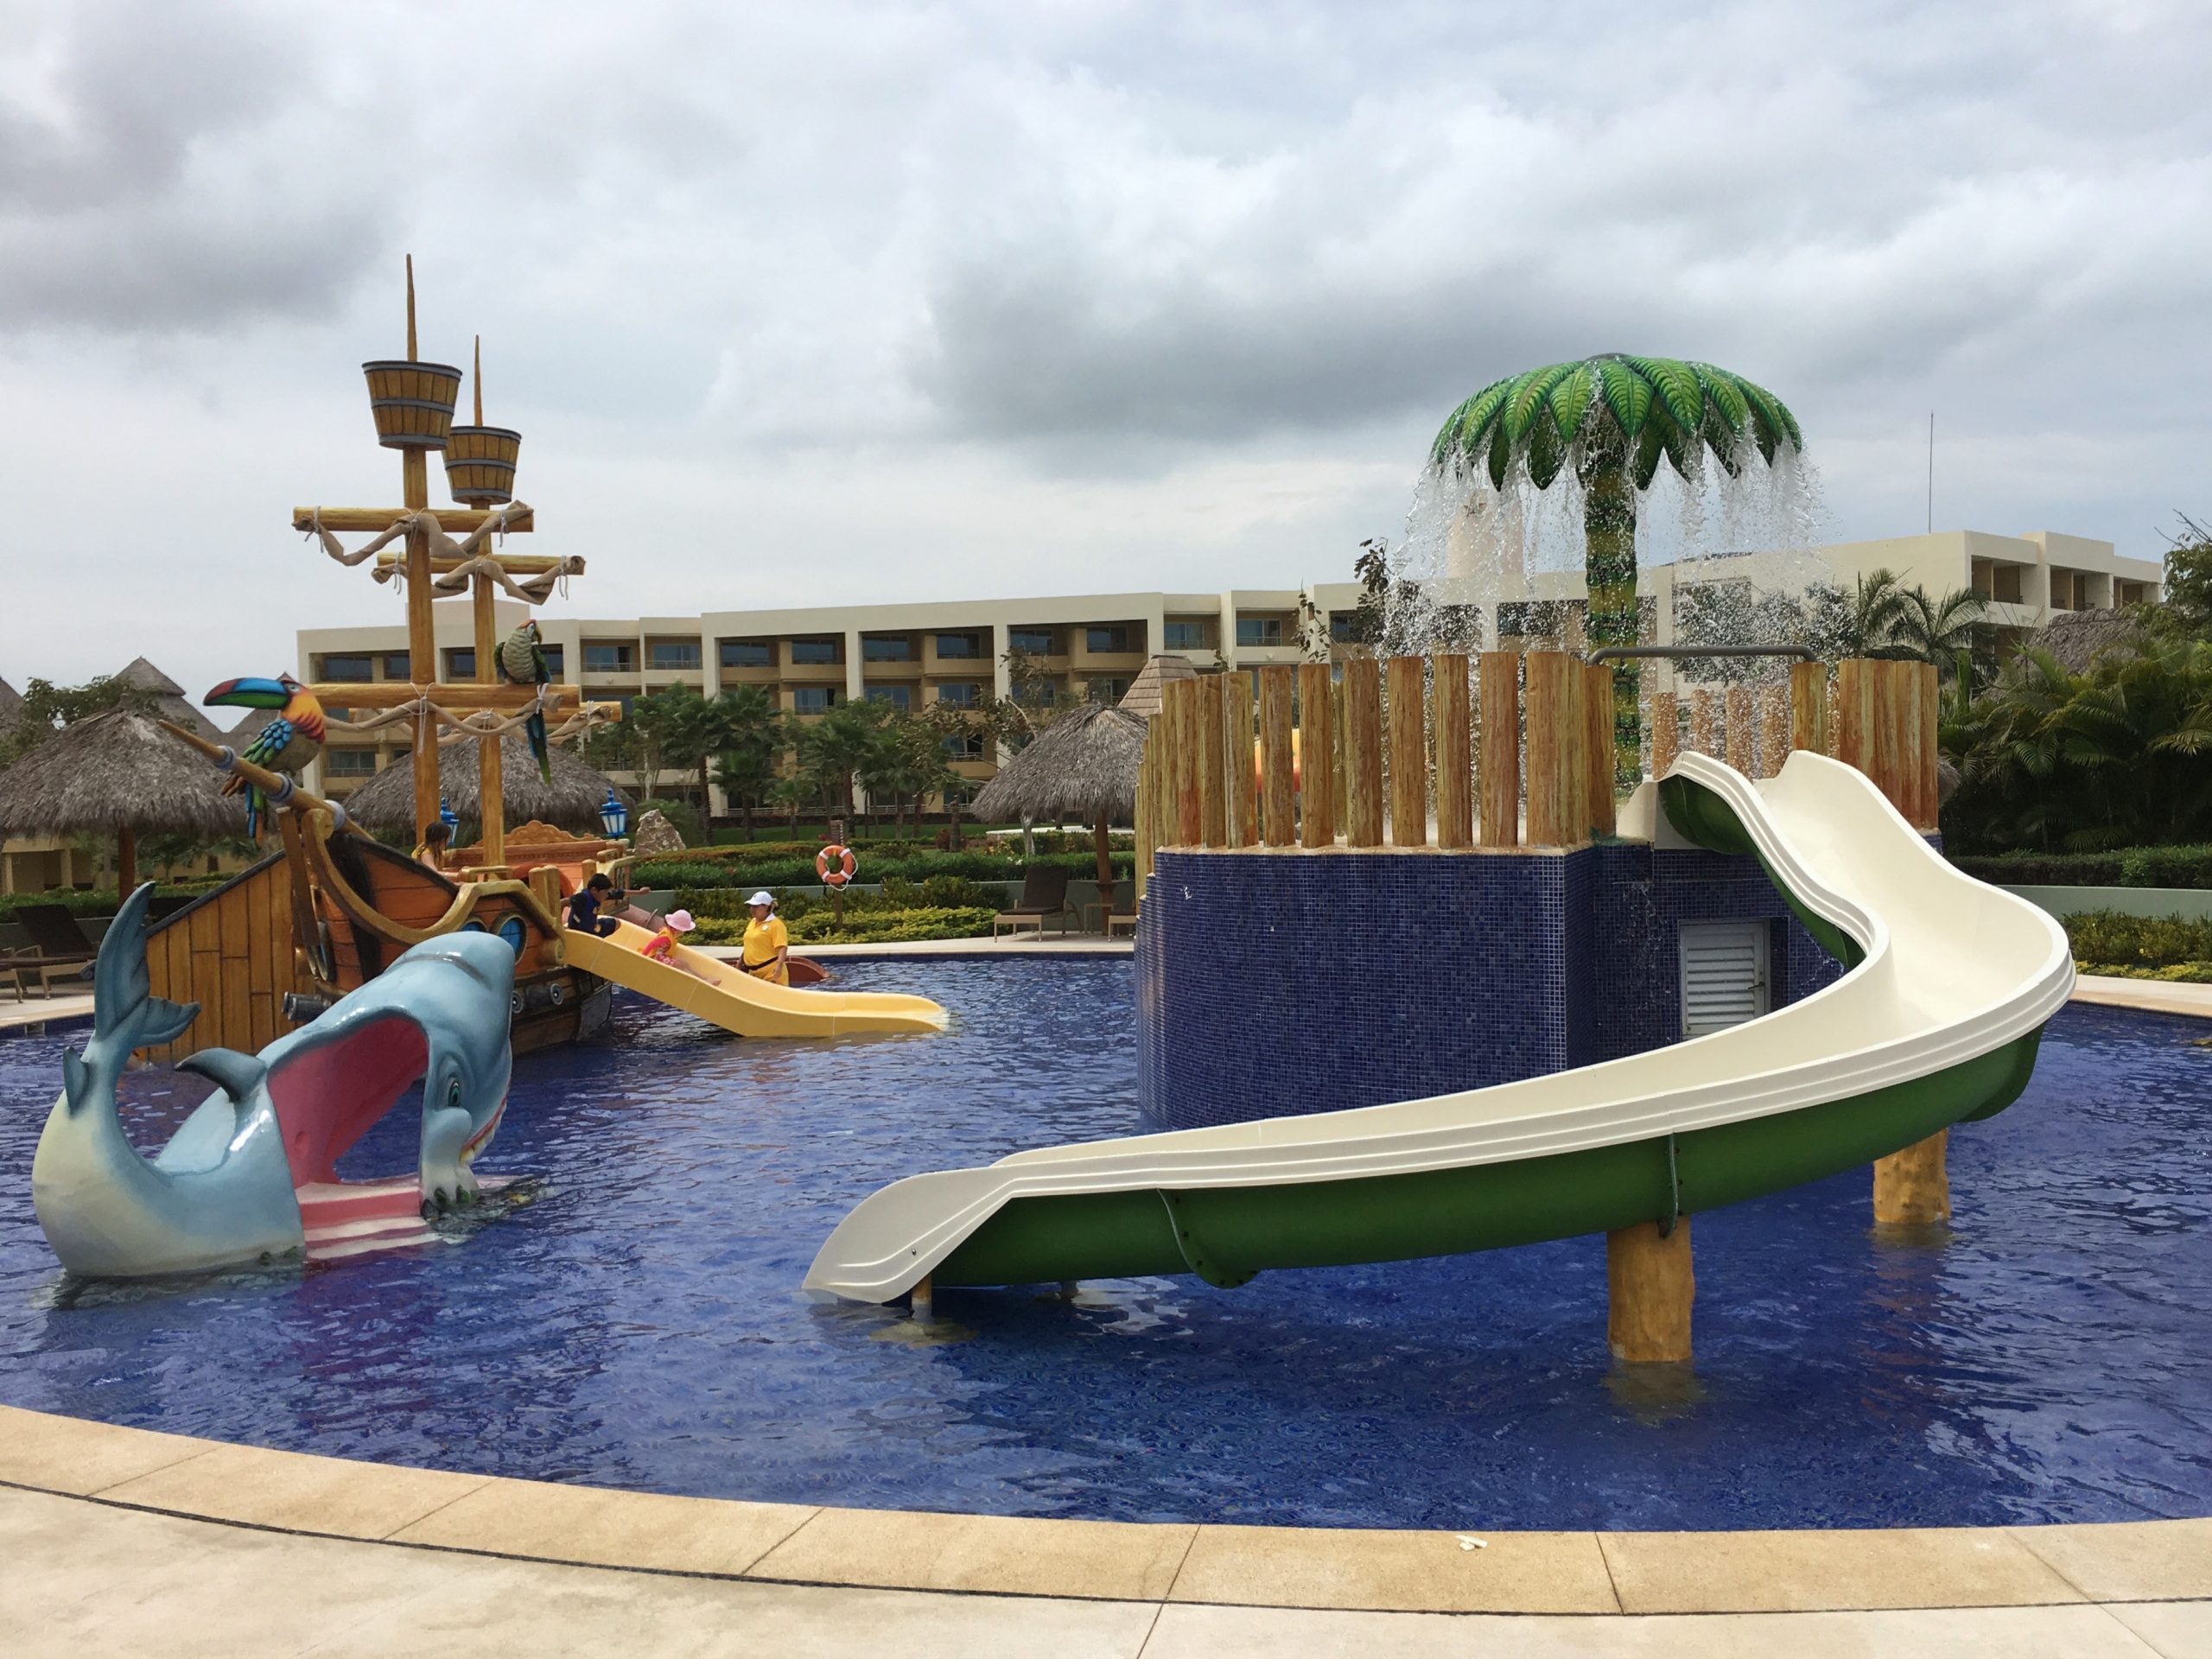 children's water play area with Palm tree and room buildings in the background